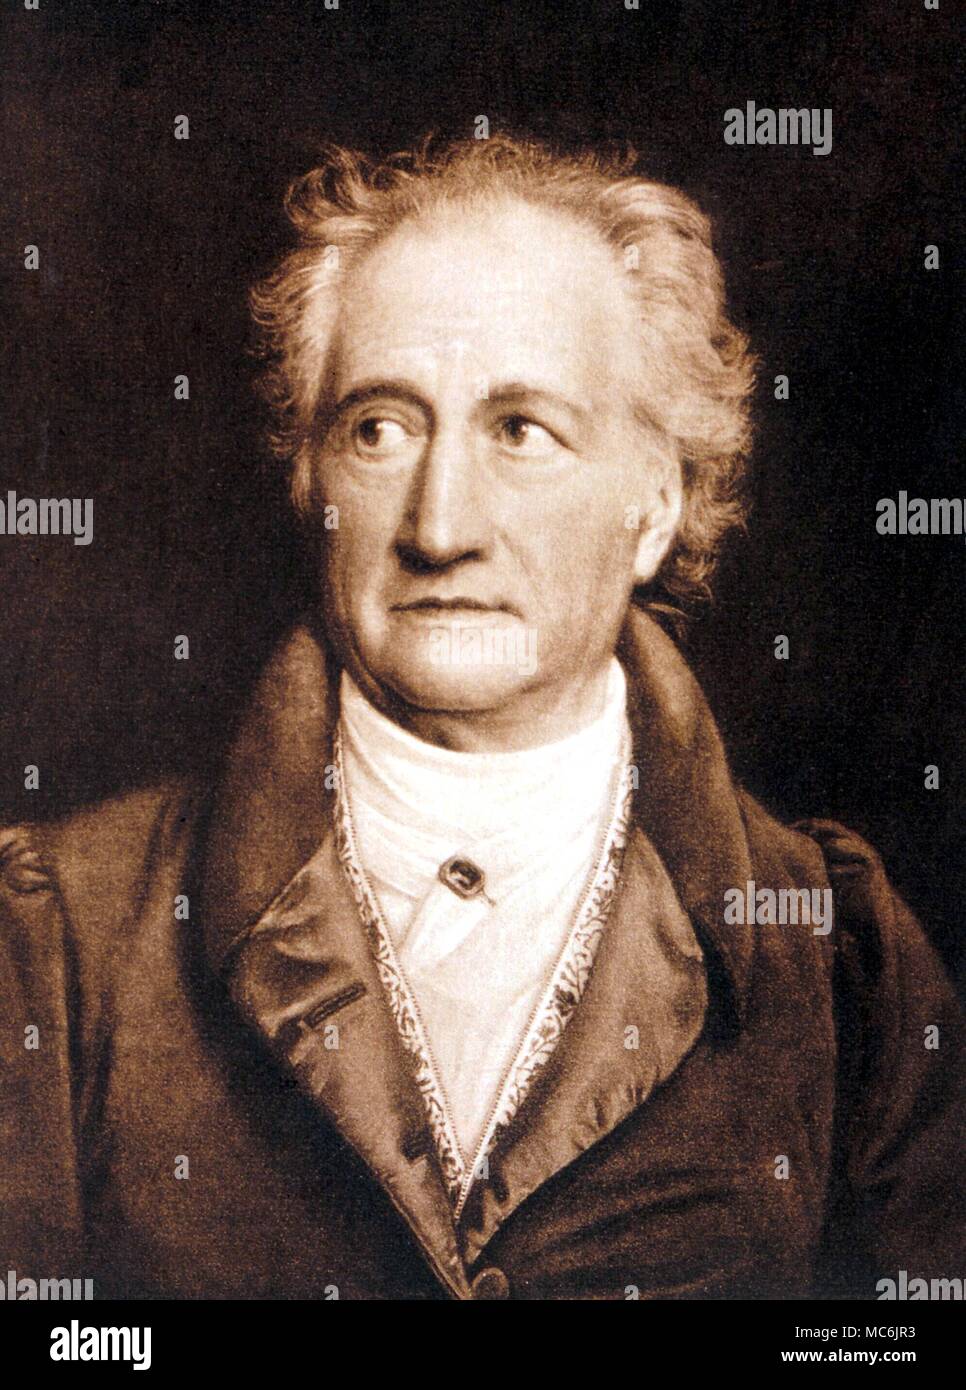 OCCULTISTS - GOETHE. Johann Wolfgang Goethe (1749-1832). Author of 'Faust' (part one 1808, part two 1831), Rosicrucian and colour theorist. Engraving from the 1864 edition of G H Lewis 'The Life of Goethe' Stock Photo